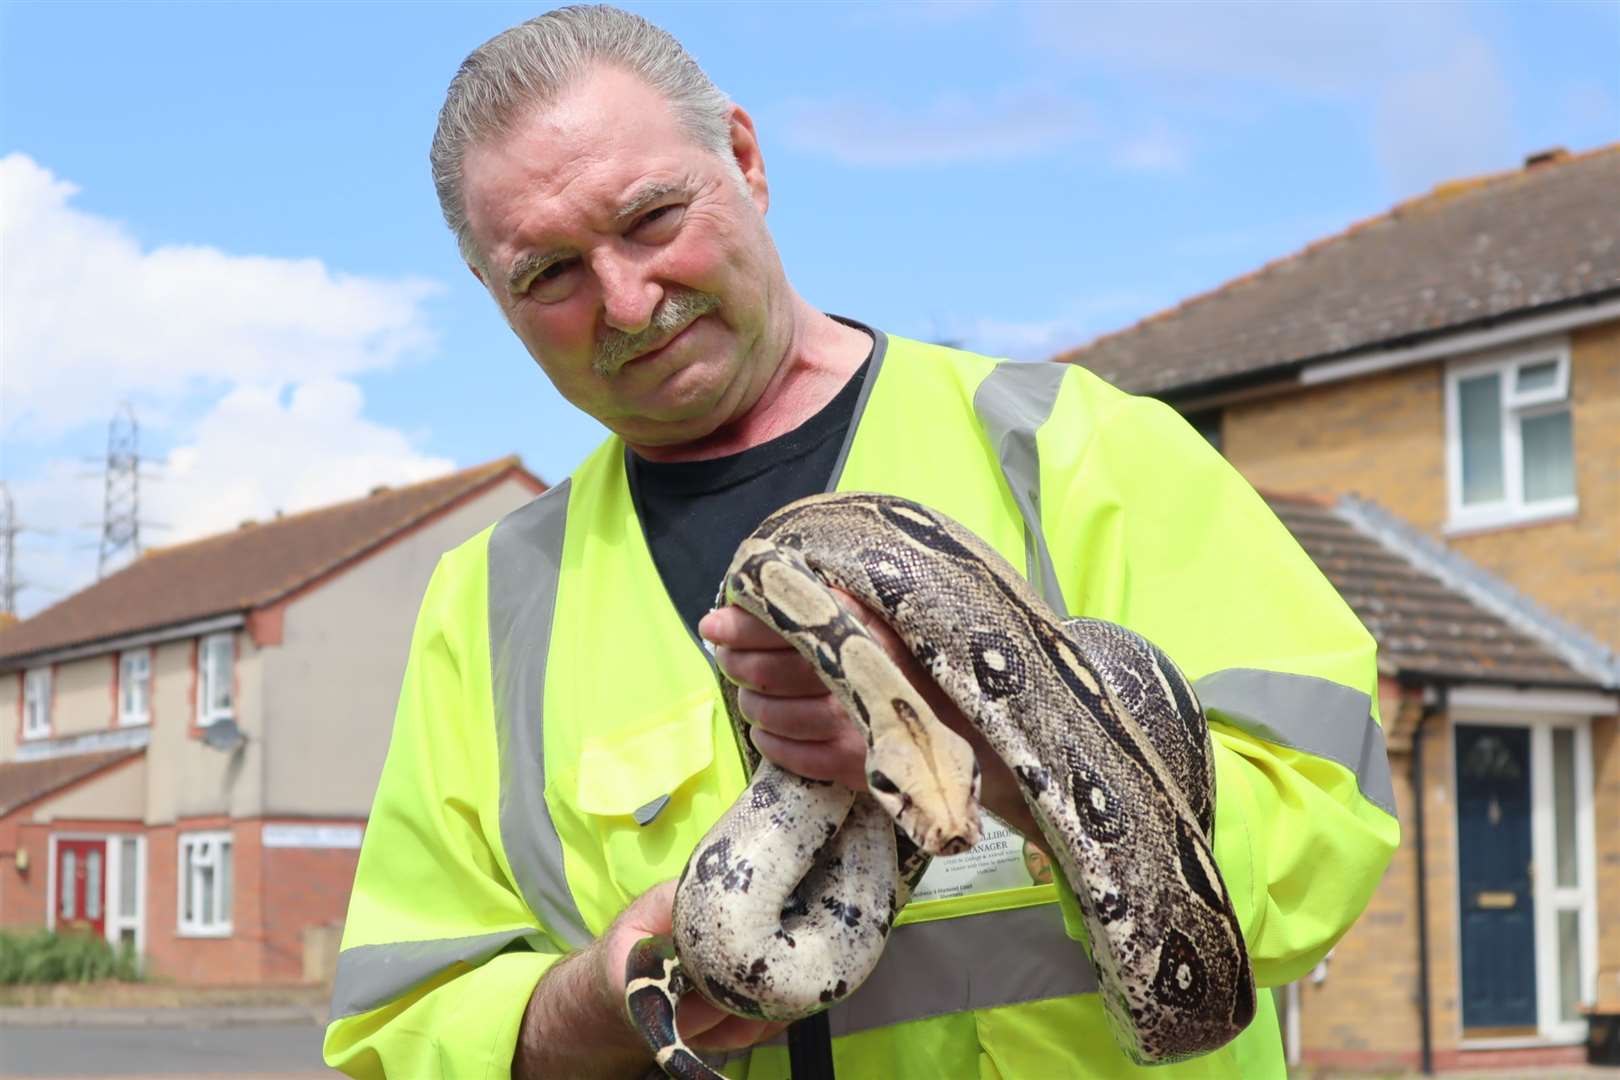 Ray Allibone of Swampys Wildlife Rescue outside his home in Sheerness with the Boa constrictor